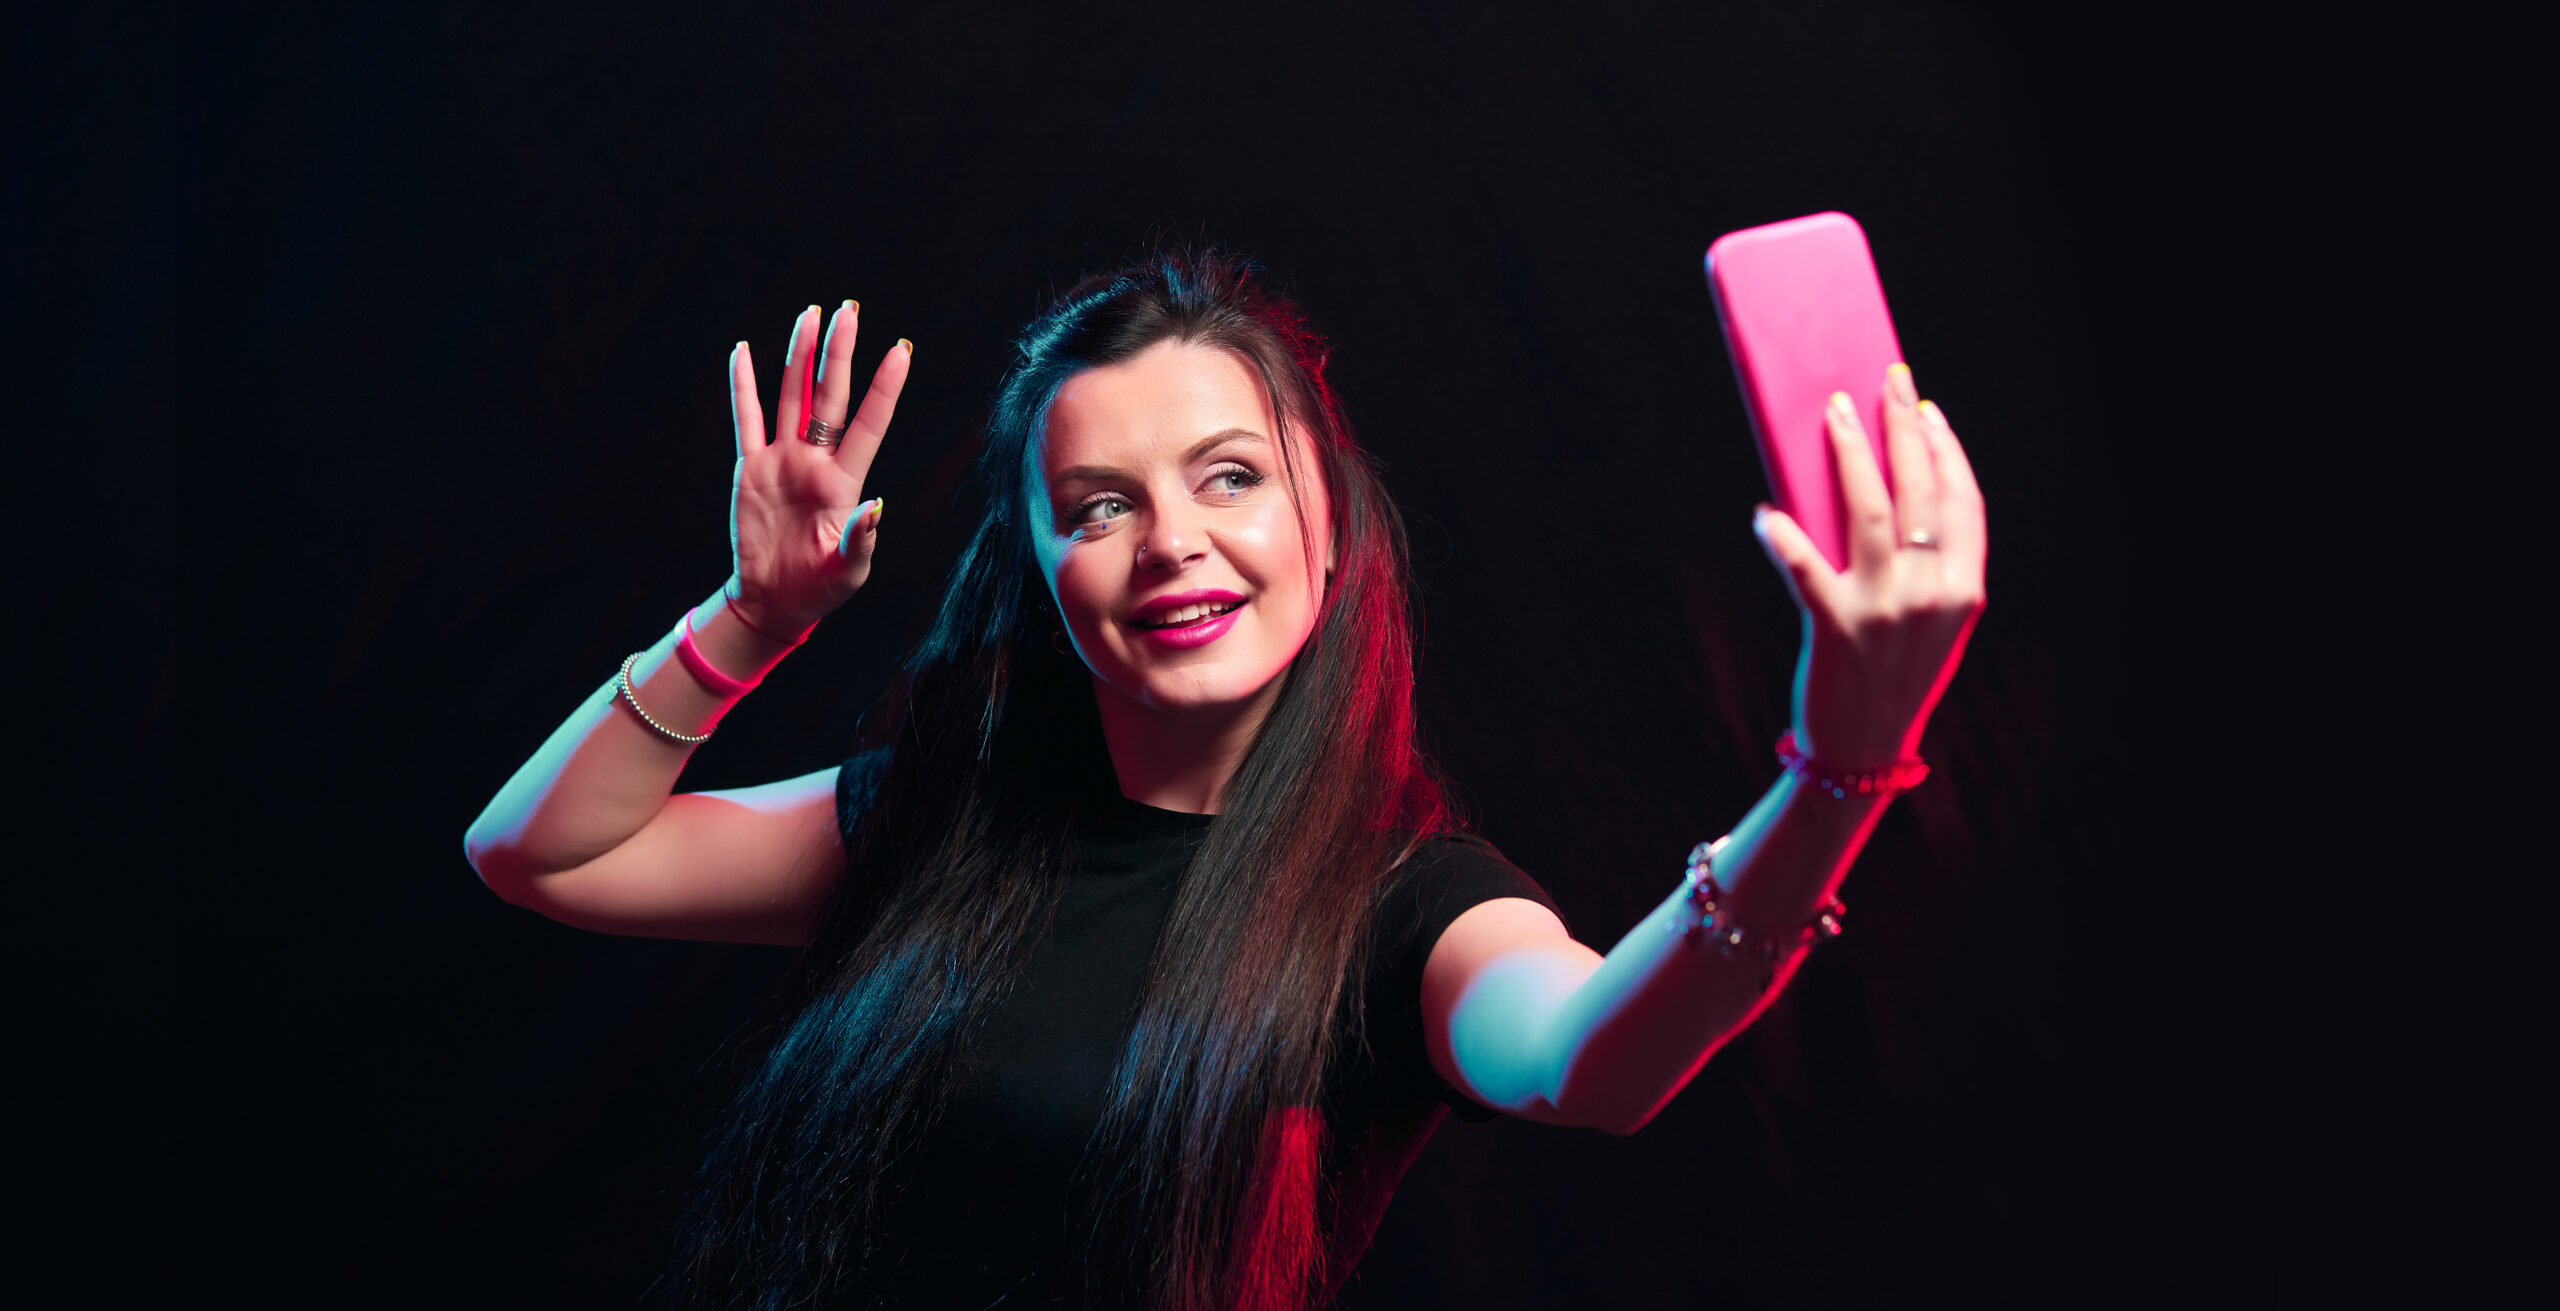 6 Reasons to Get Your Business on TikTok